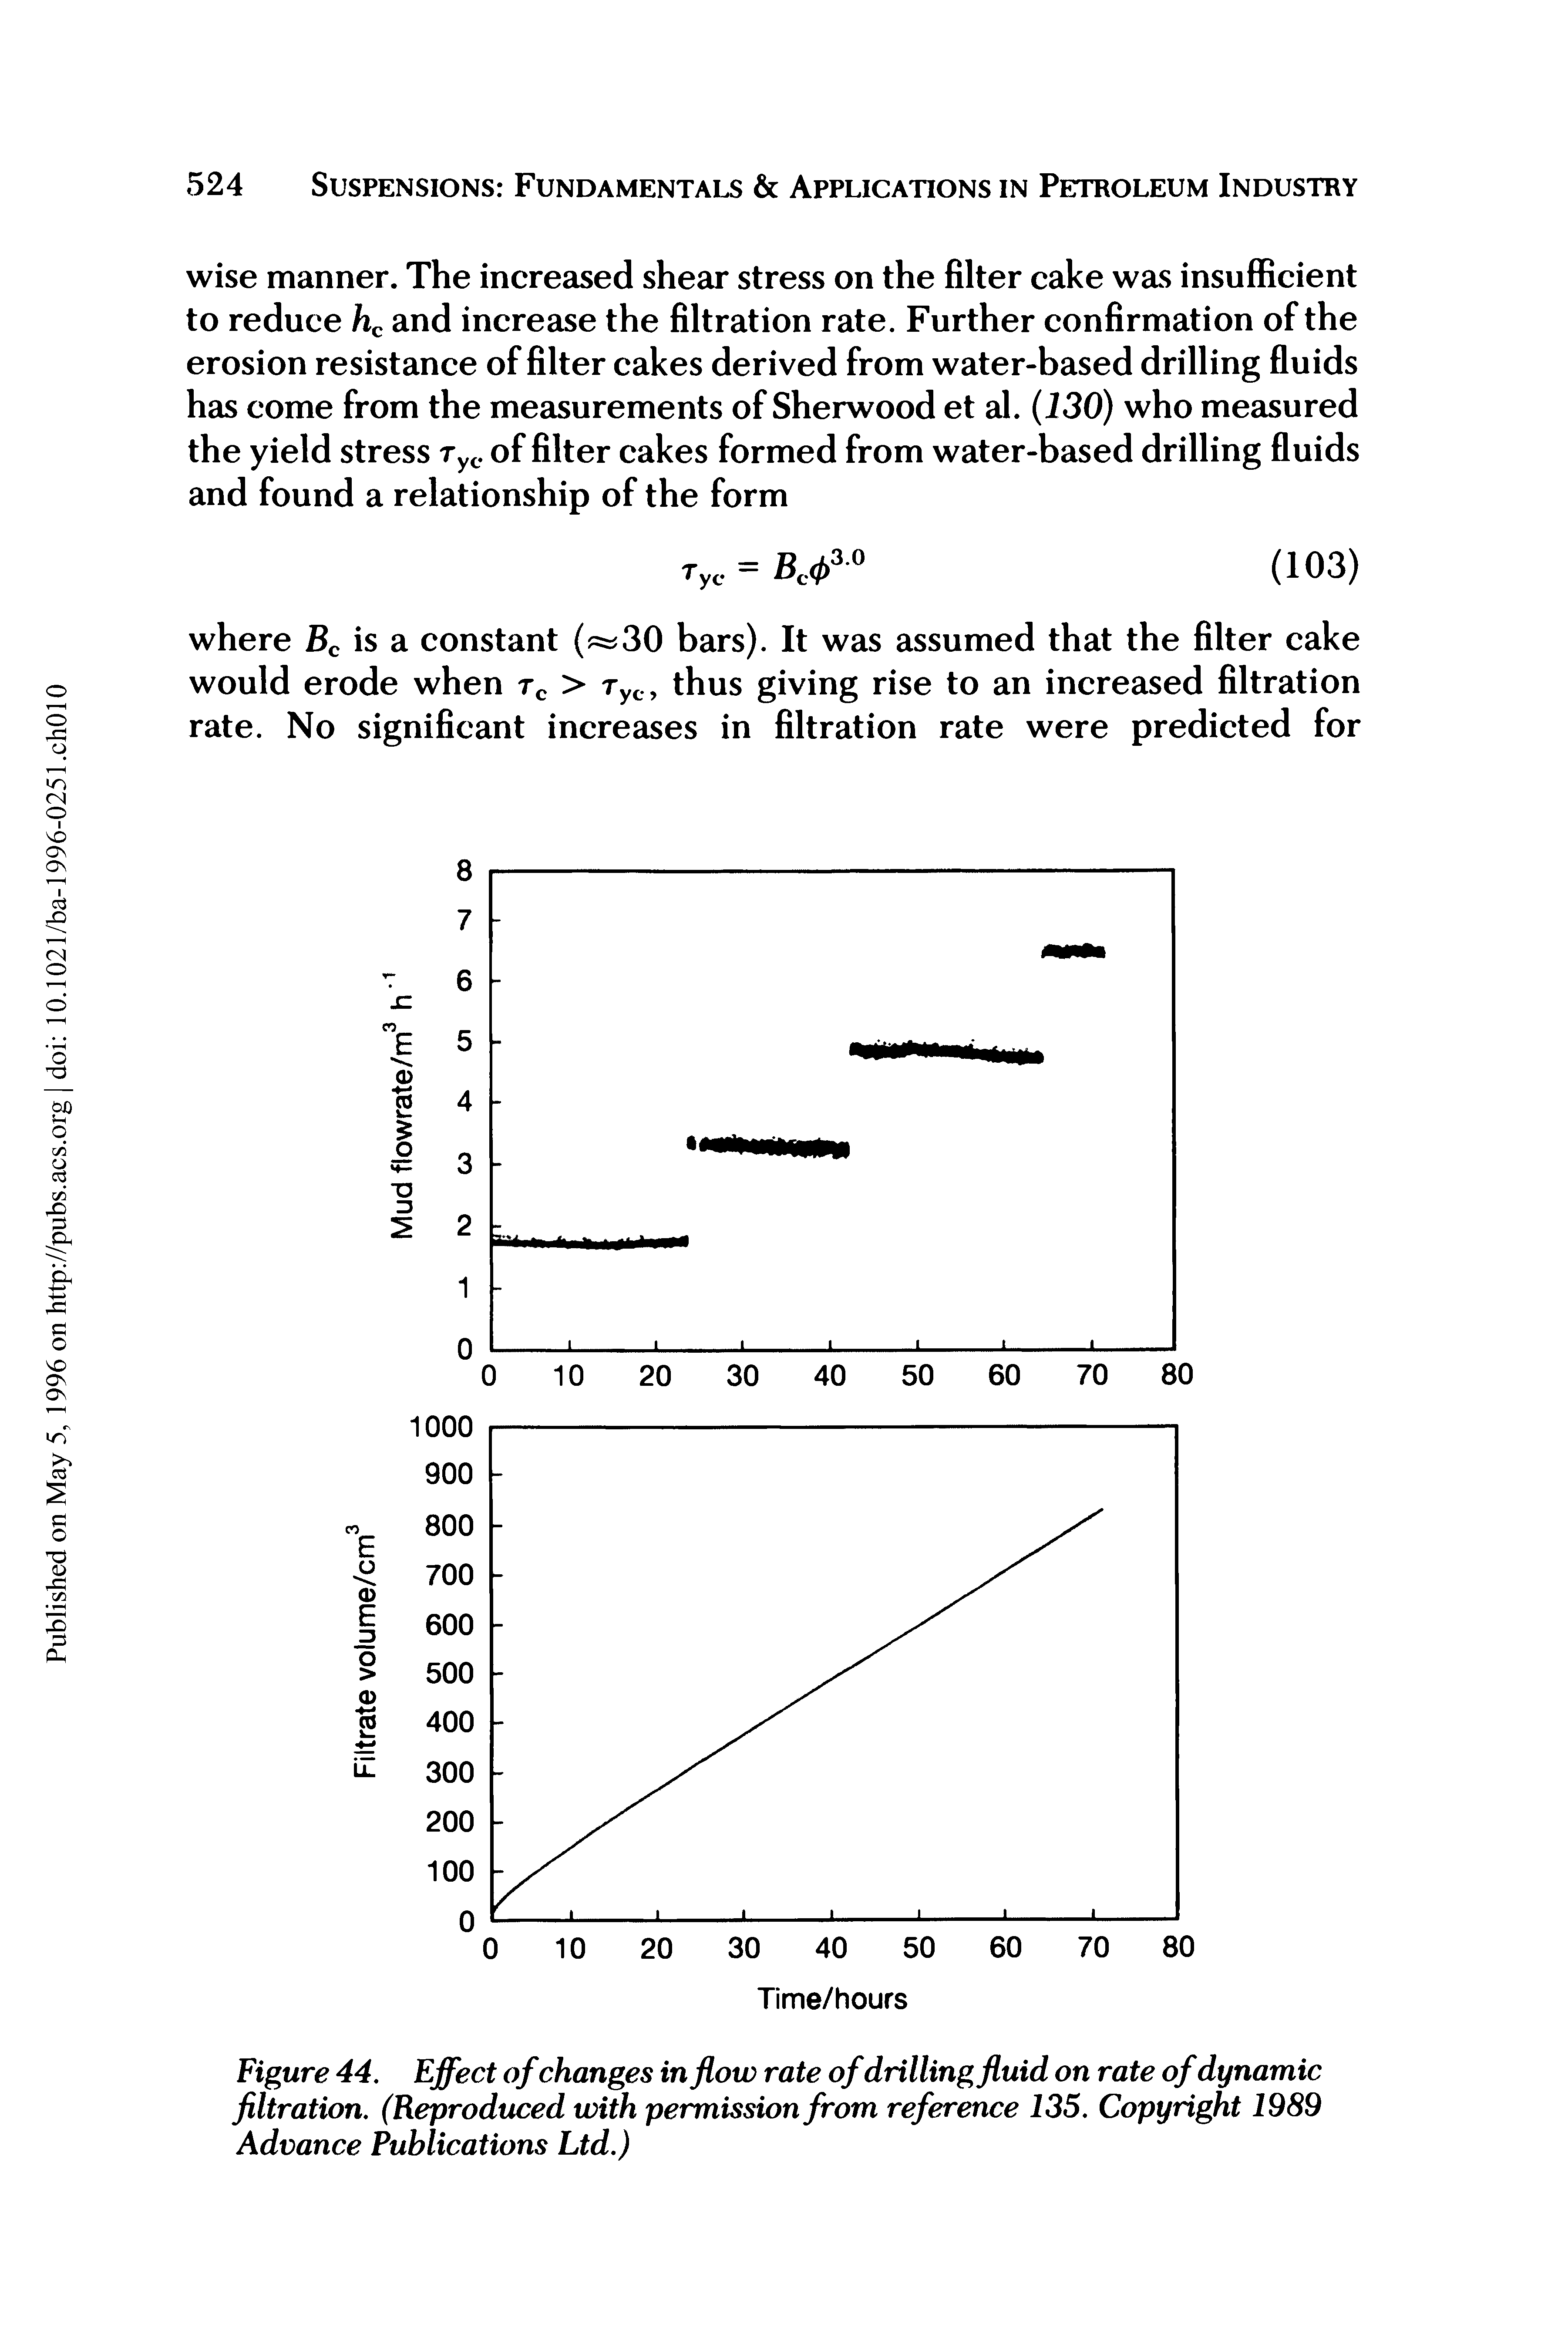 Figure 44. Effect of changes inflow rate of drilling fluid on rate of dynamic filtration. (Reproduced with permission from reference 135. Copyright 1989 Advance Publications Ltd.)...